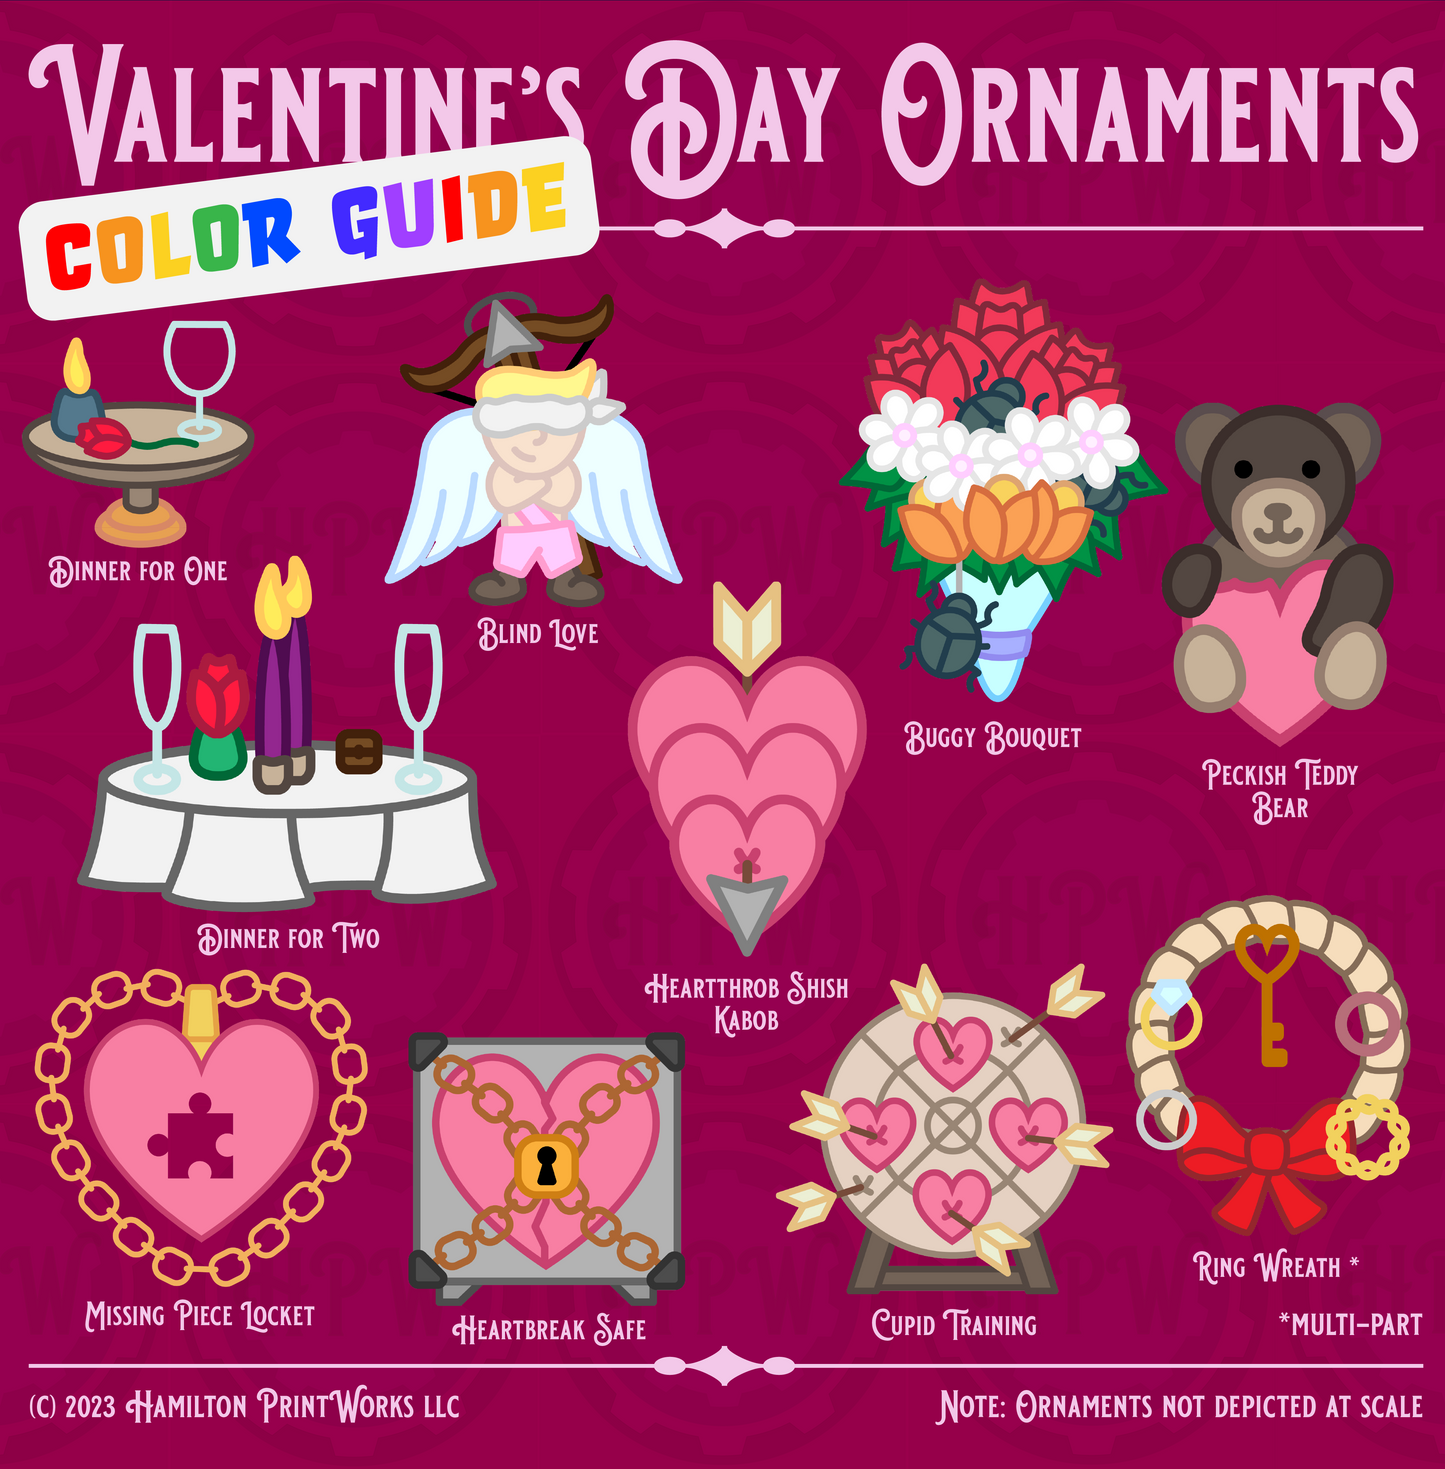 Valentine's Day Ornaments | Holiday Decorations